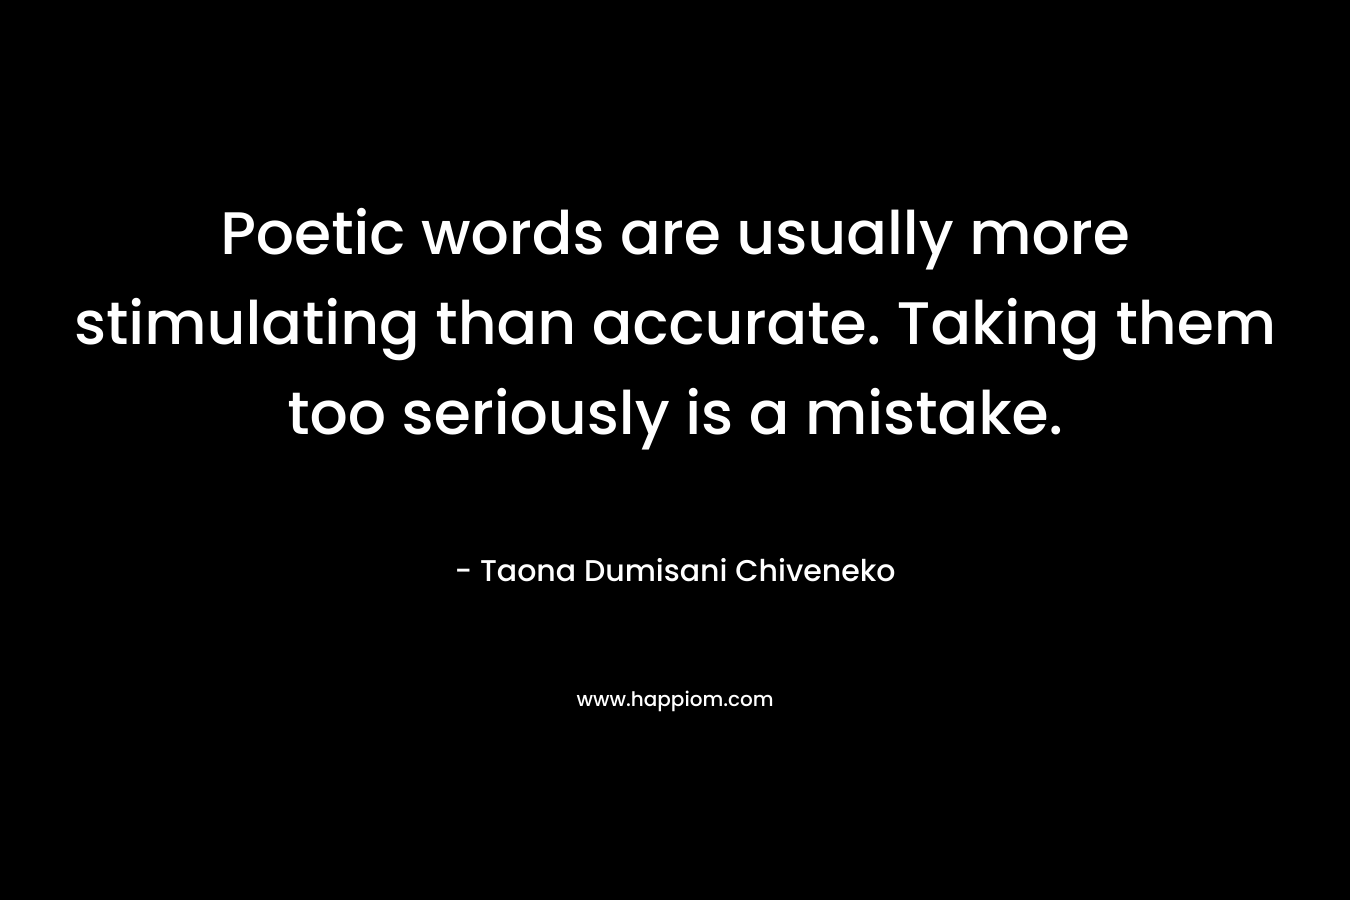 Poetic words are usually more stimulating than accurate. Taking them too seriously is a mistake. – Taona Dumisani Chiveneko